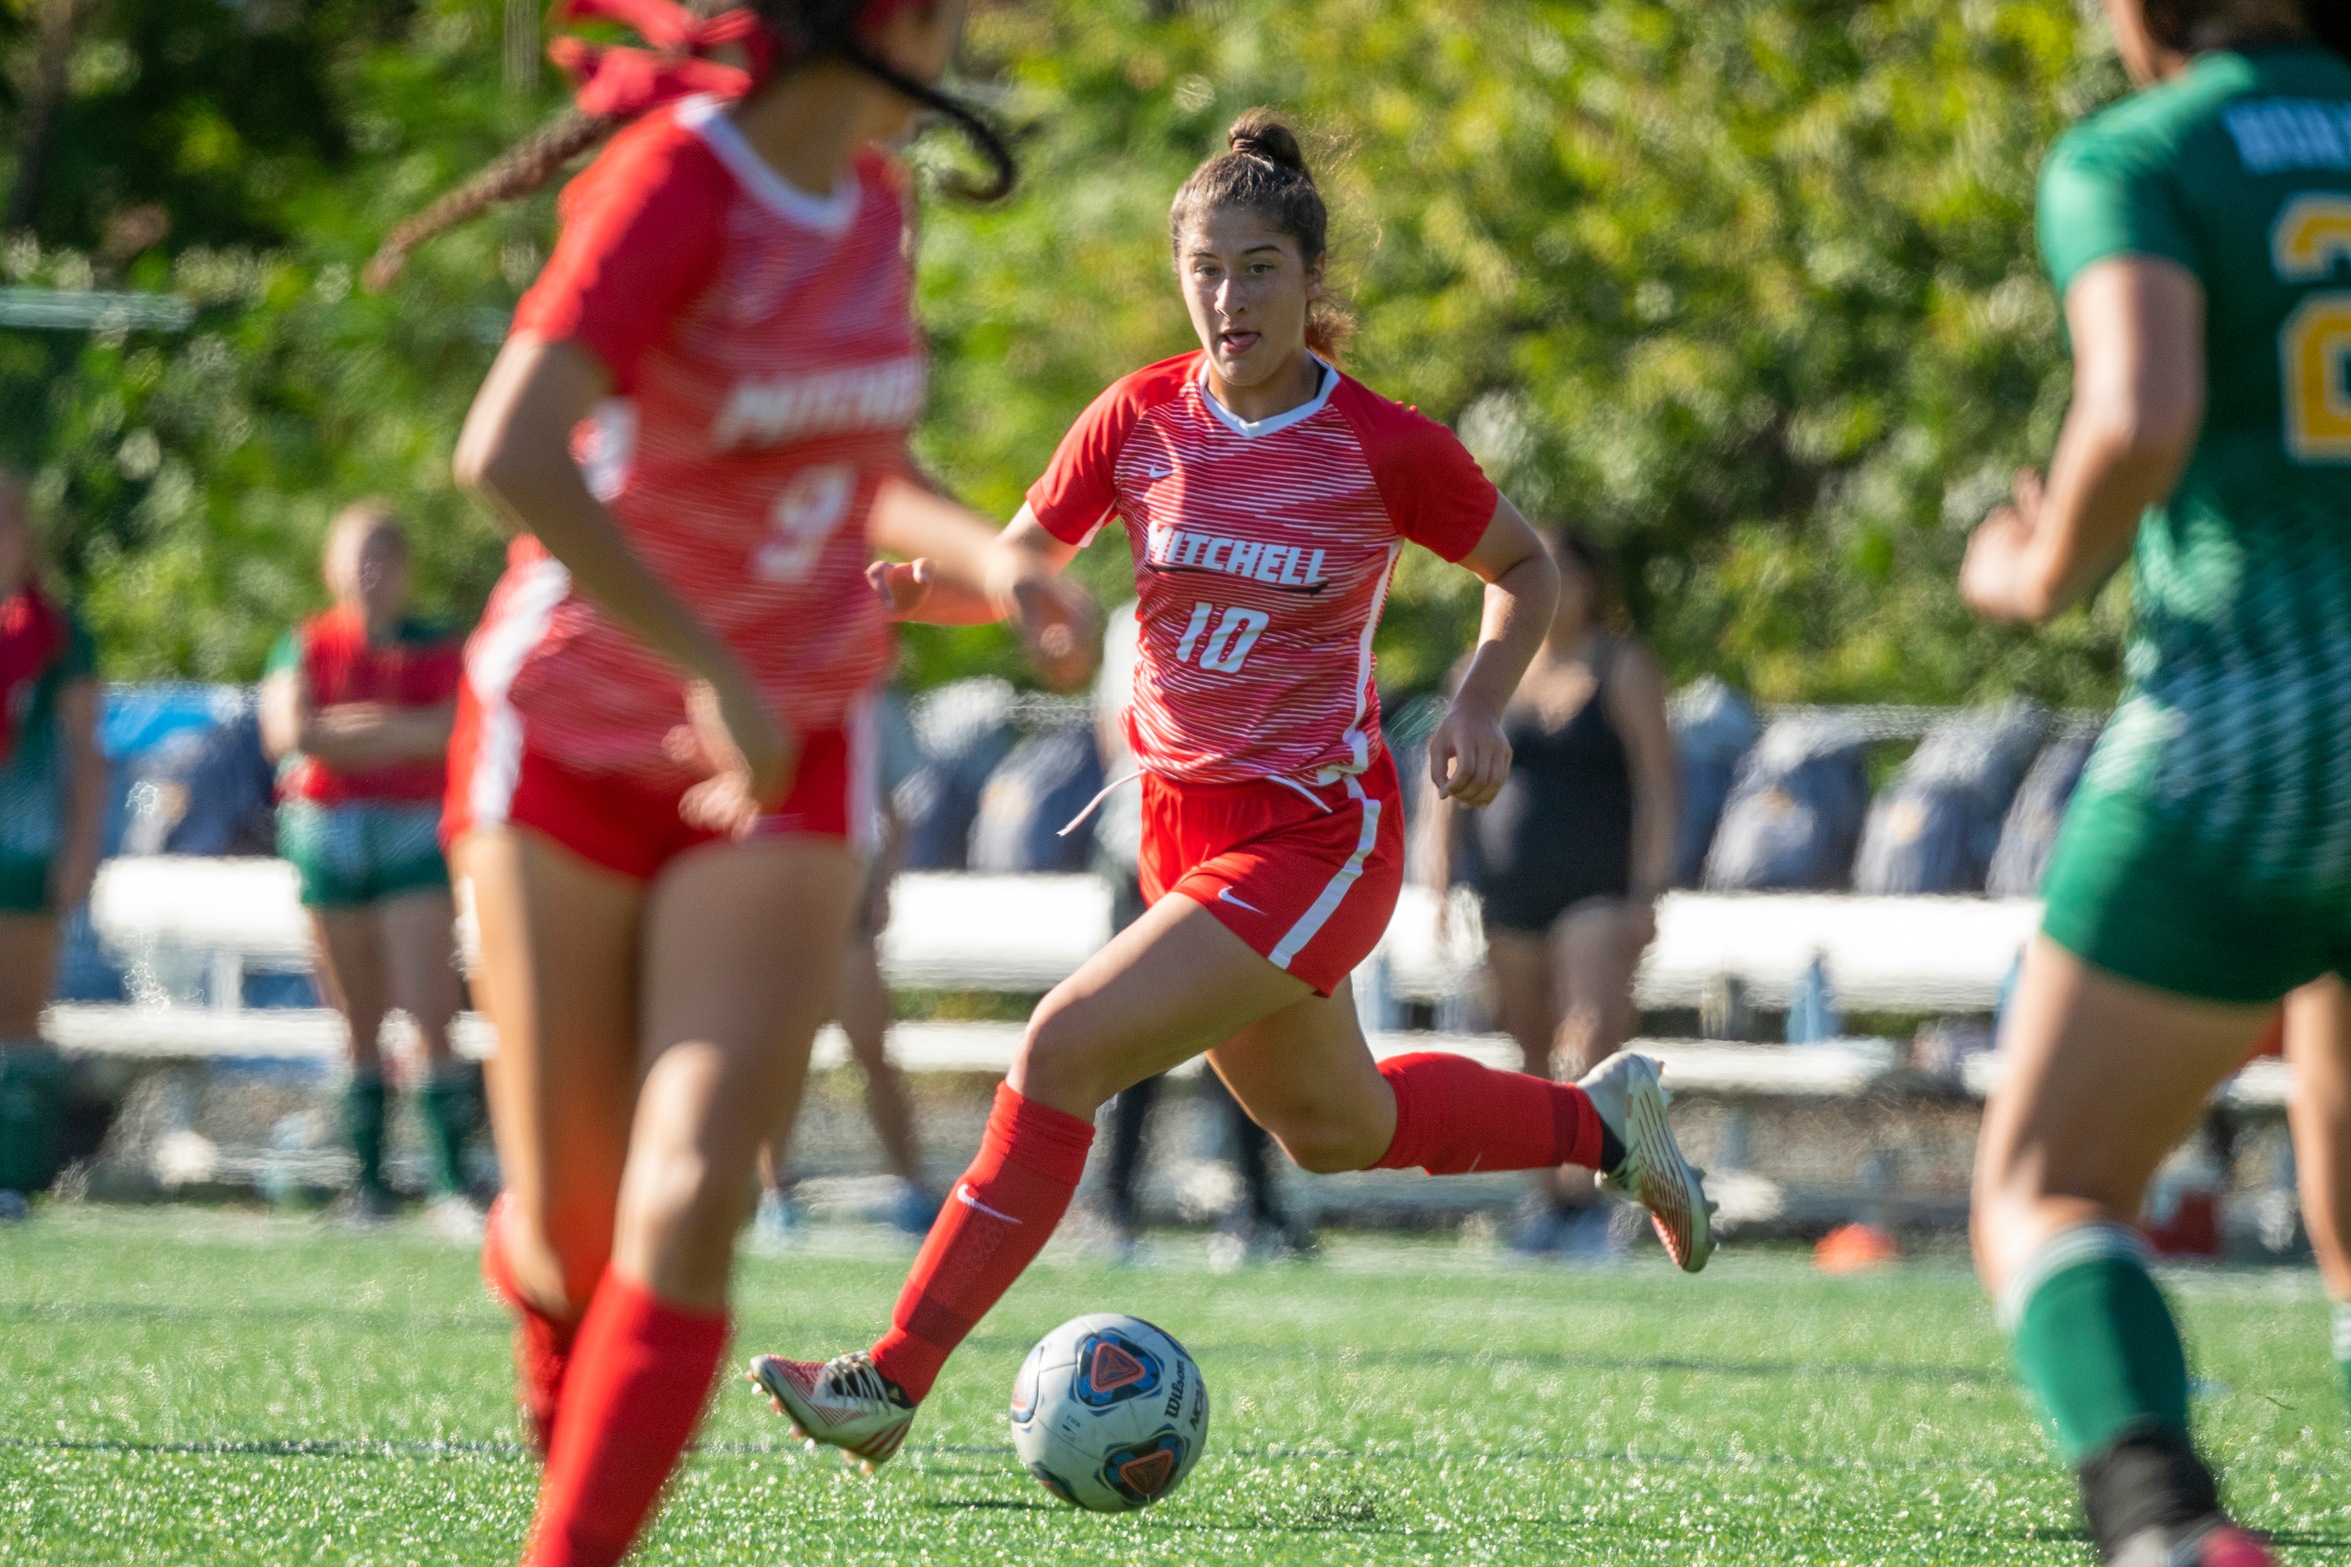 Women's Soccer Plays to Draw with ENC in Regular Season Finale